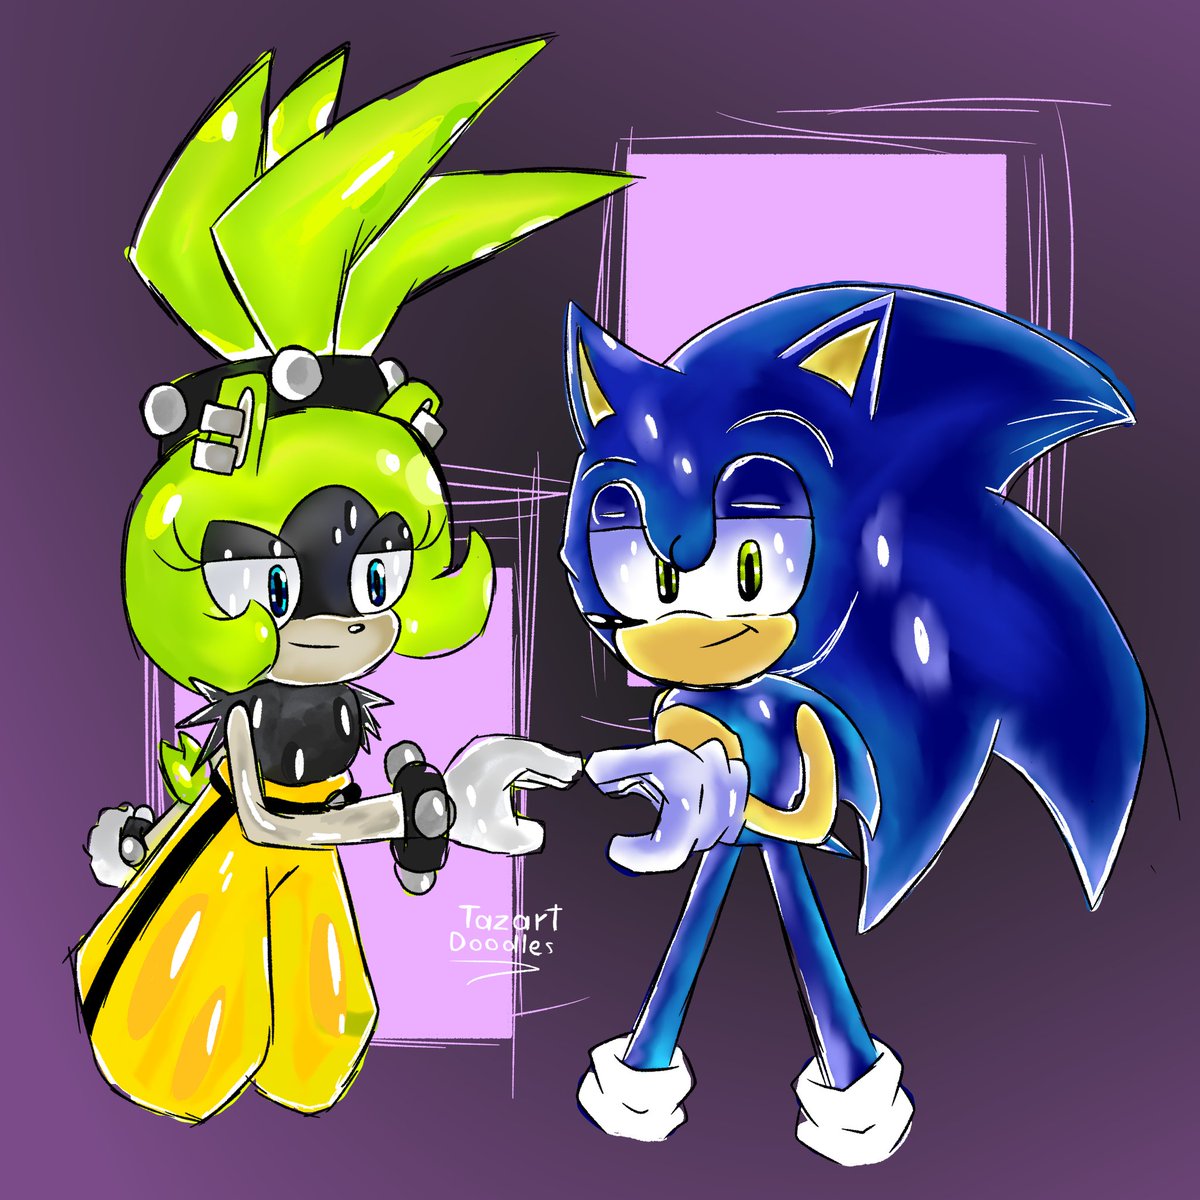 trying to use brighter colors, what do you think? #SonicTheHedgehog #SurgeTheTenrec #Sonurge